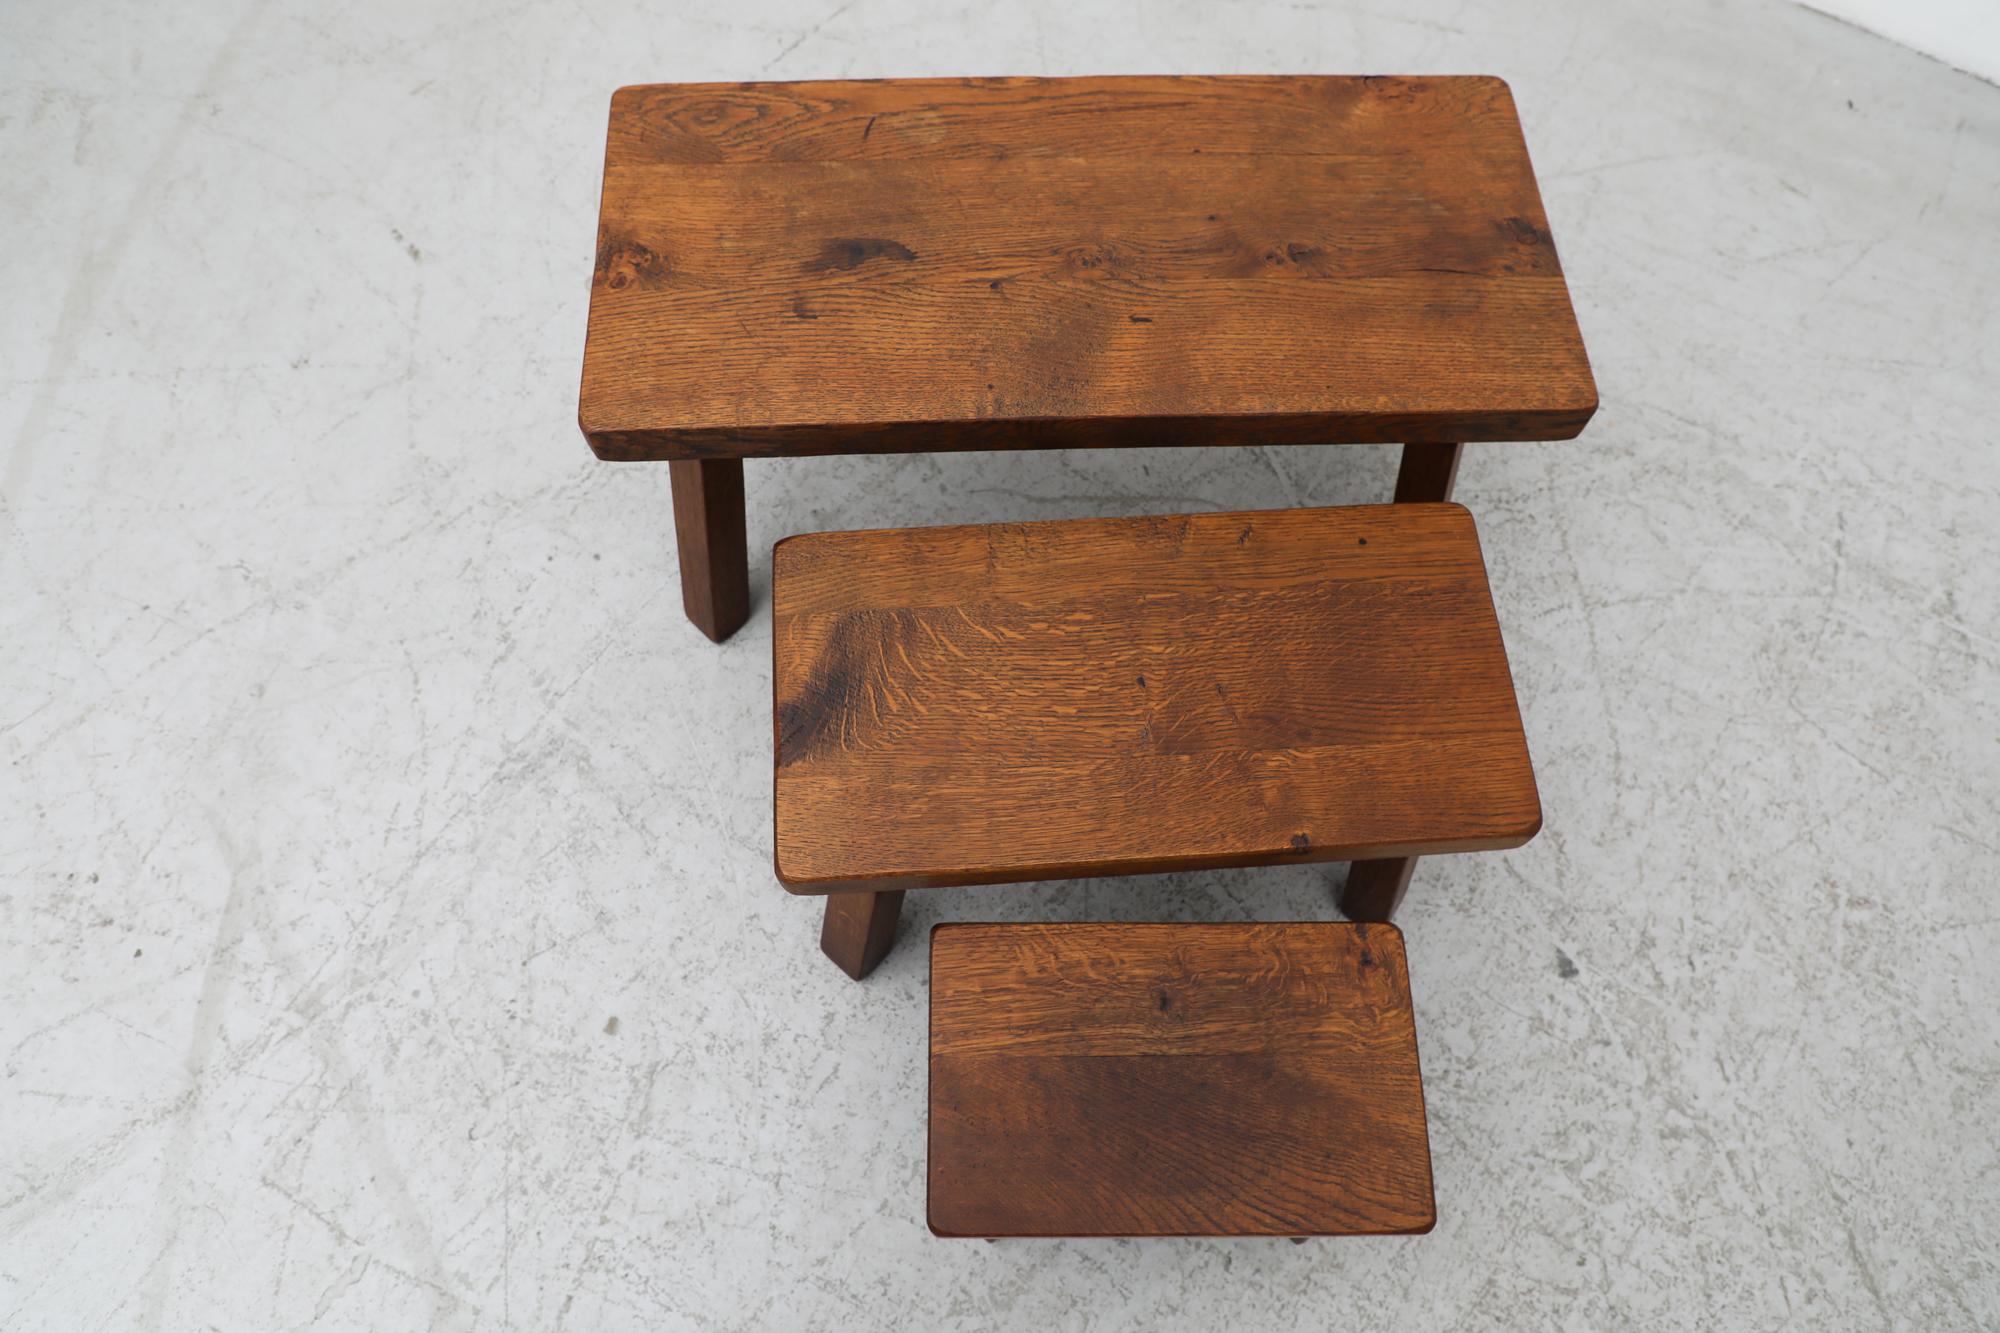 Pierre Chapo Inspired Brutalist Nesting Tables with Short Legs 1